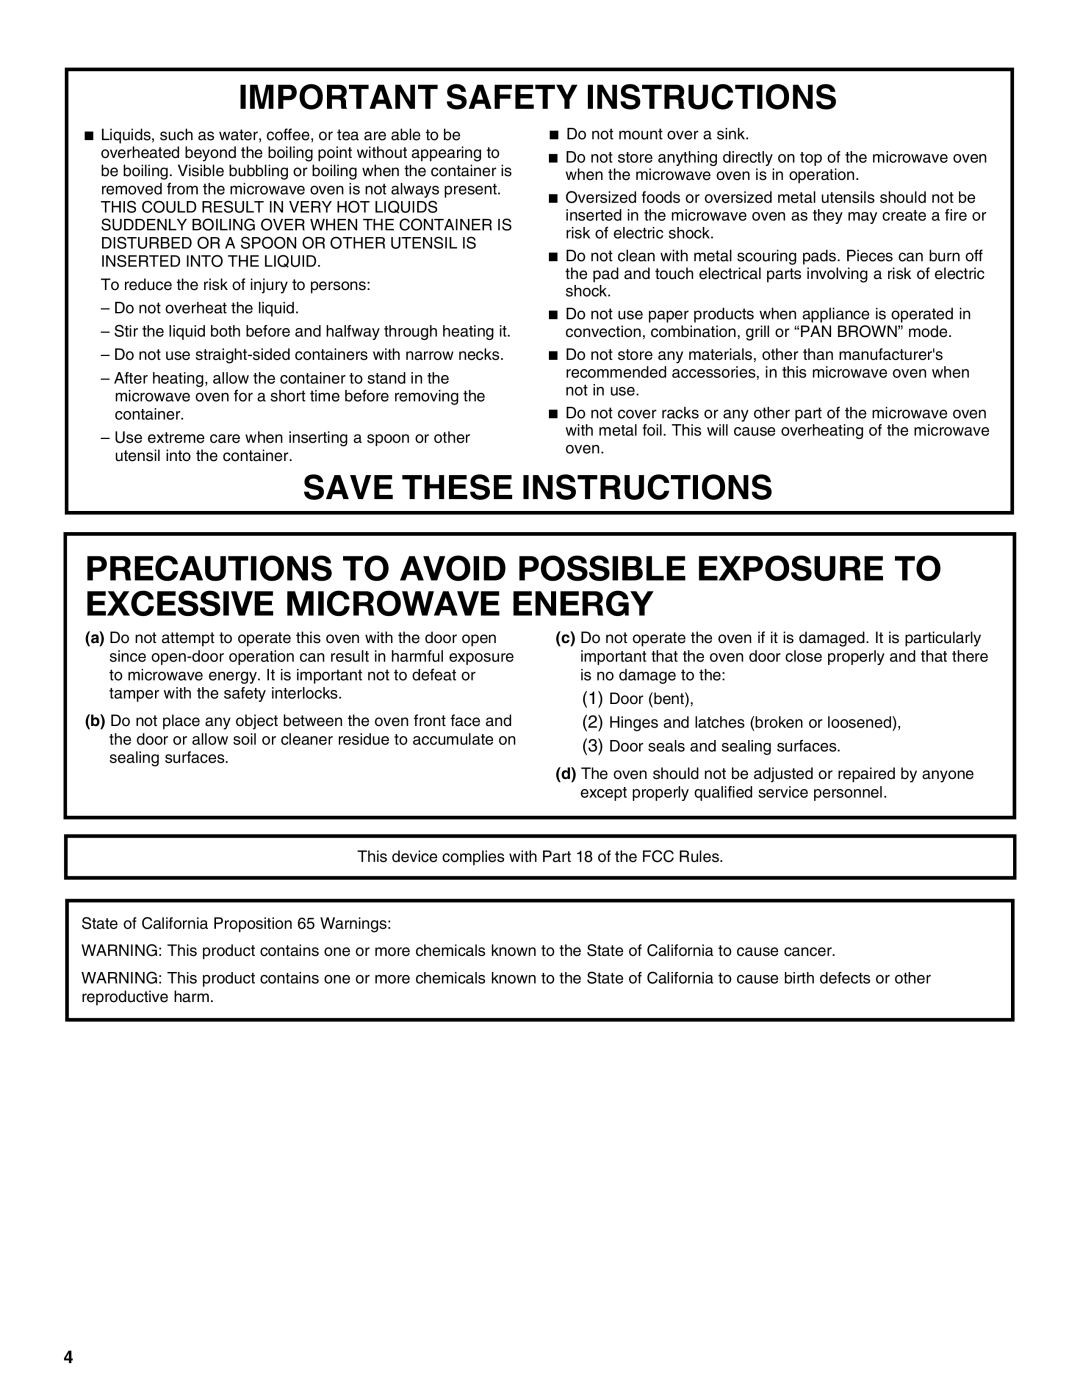 Jenn-Air W10491278A Precautions To Avoid Possible Exposure To Excessive Microwave Energy, Important Safety Instructions 